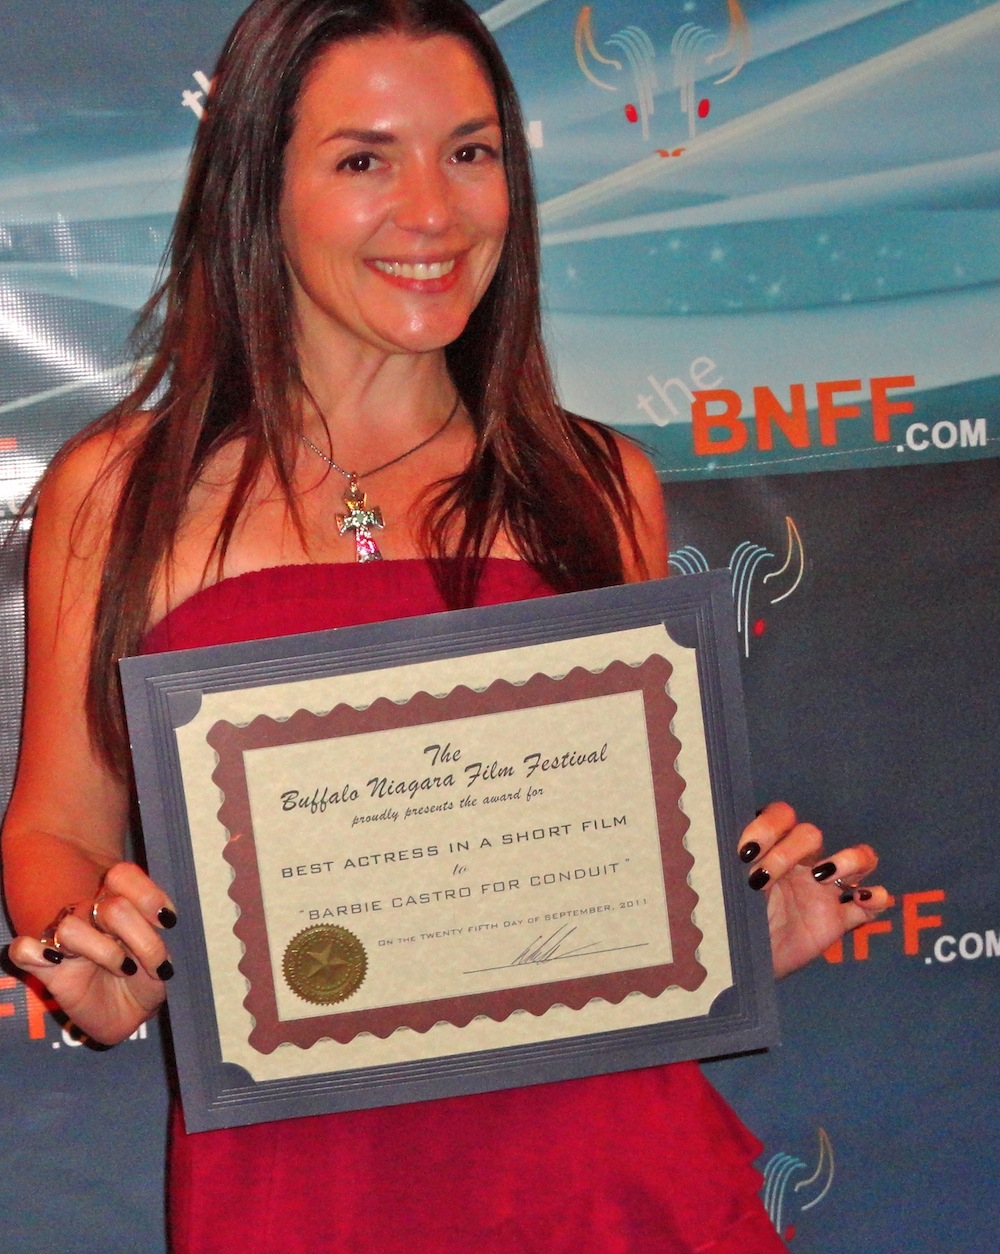 Barbie Castro accepting her Best Actress award for CONDUIT at the Buffalo Niagara Film Festival Sept 2011